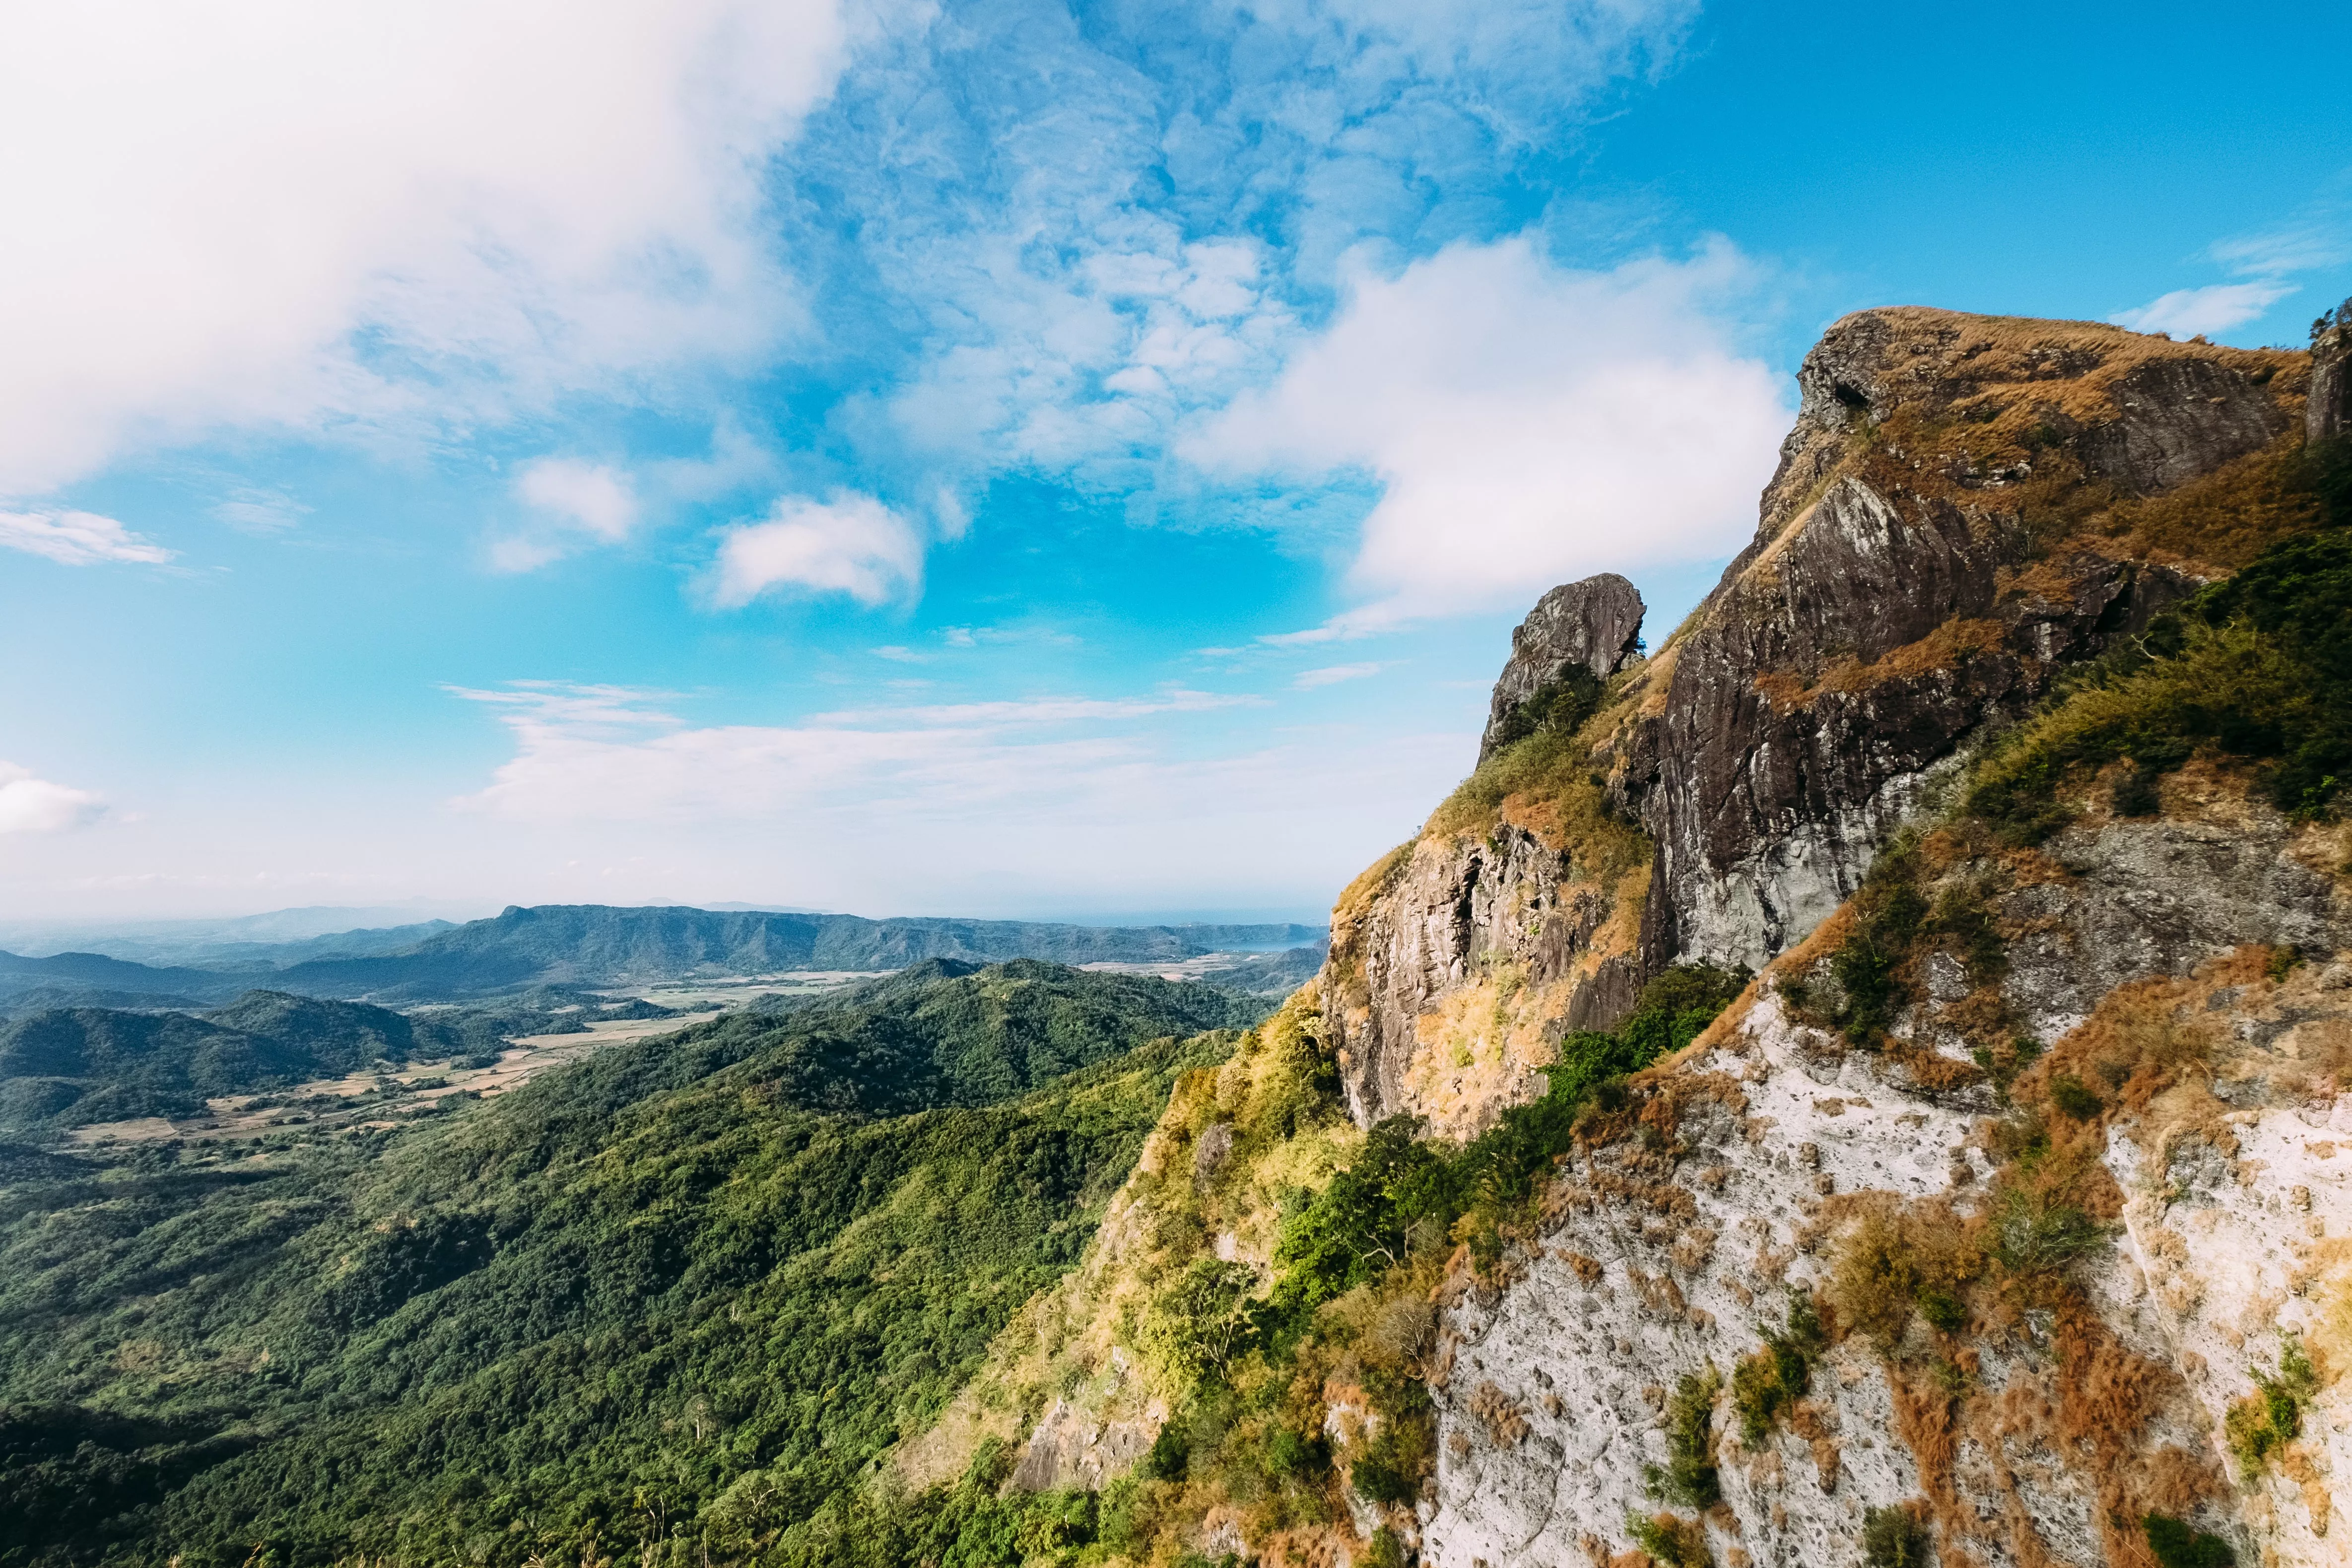 Mount Pico De Loro in Philippines, Central Asia | Trekking & Hiking - Rated 0.8